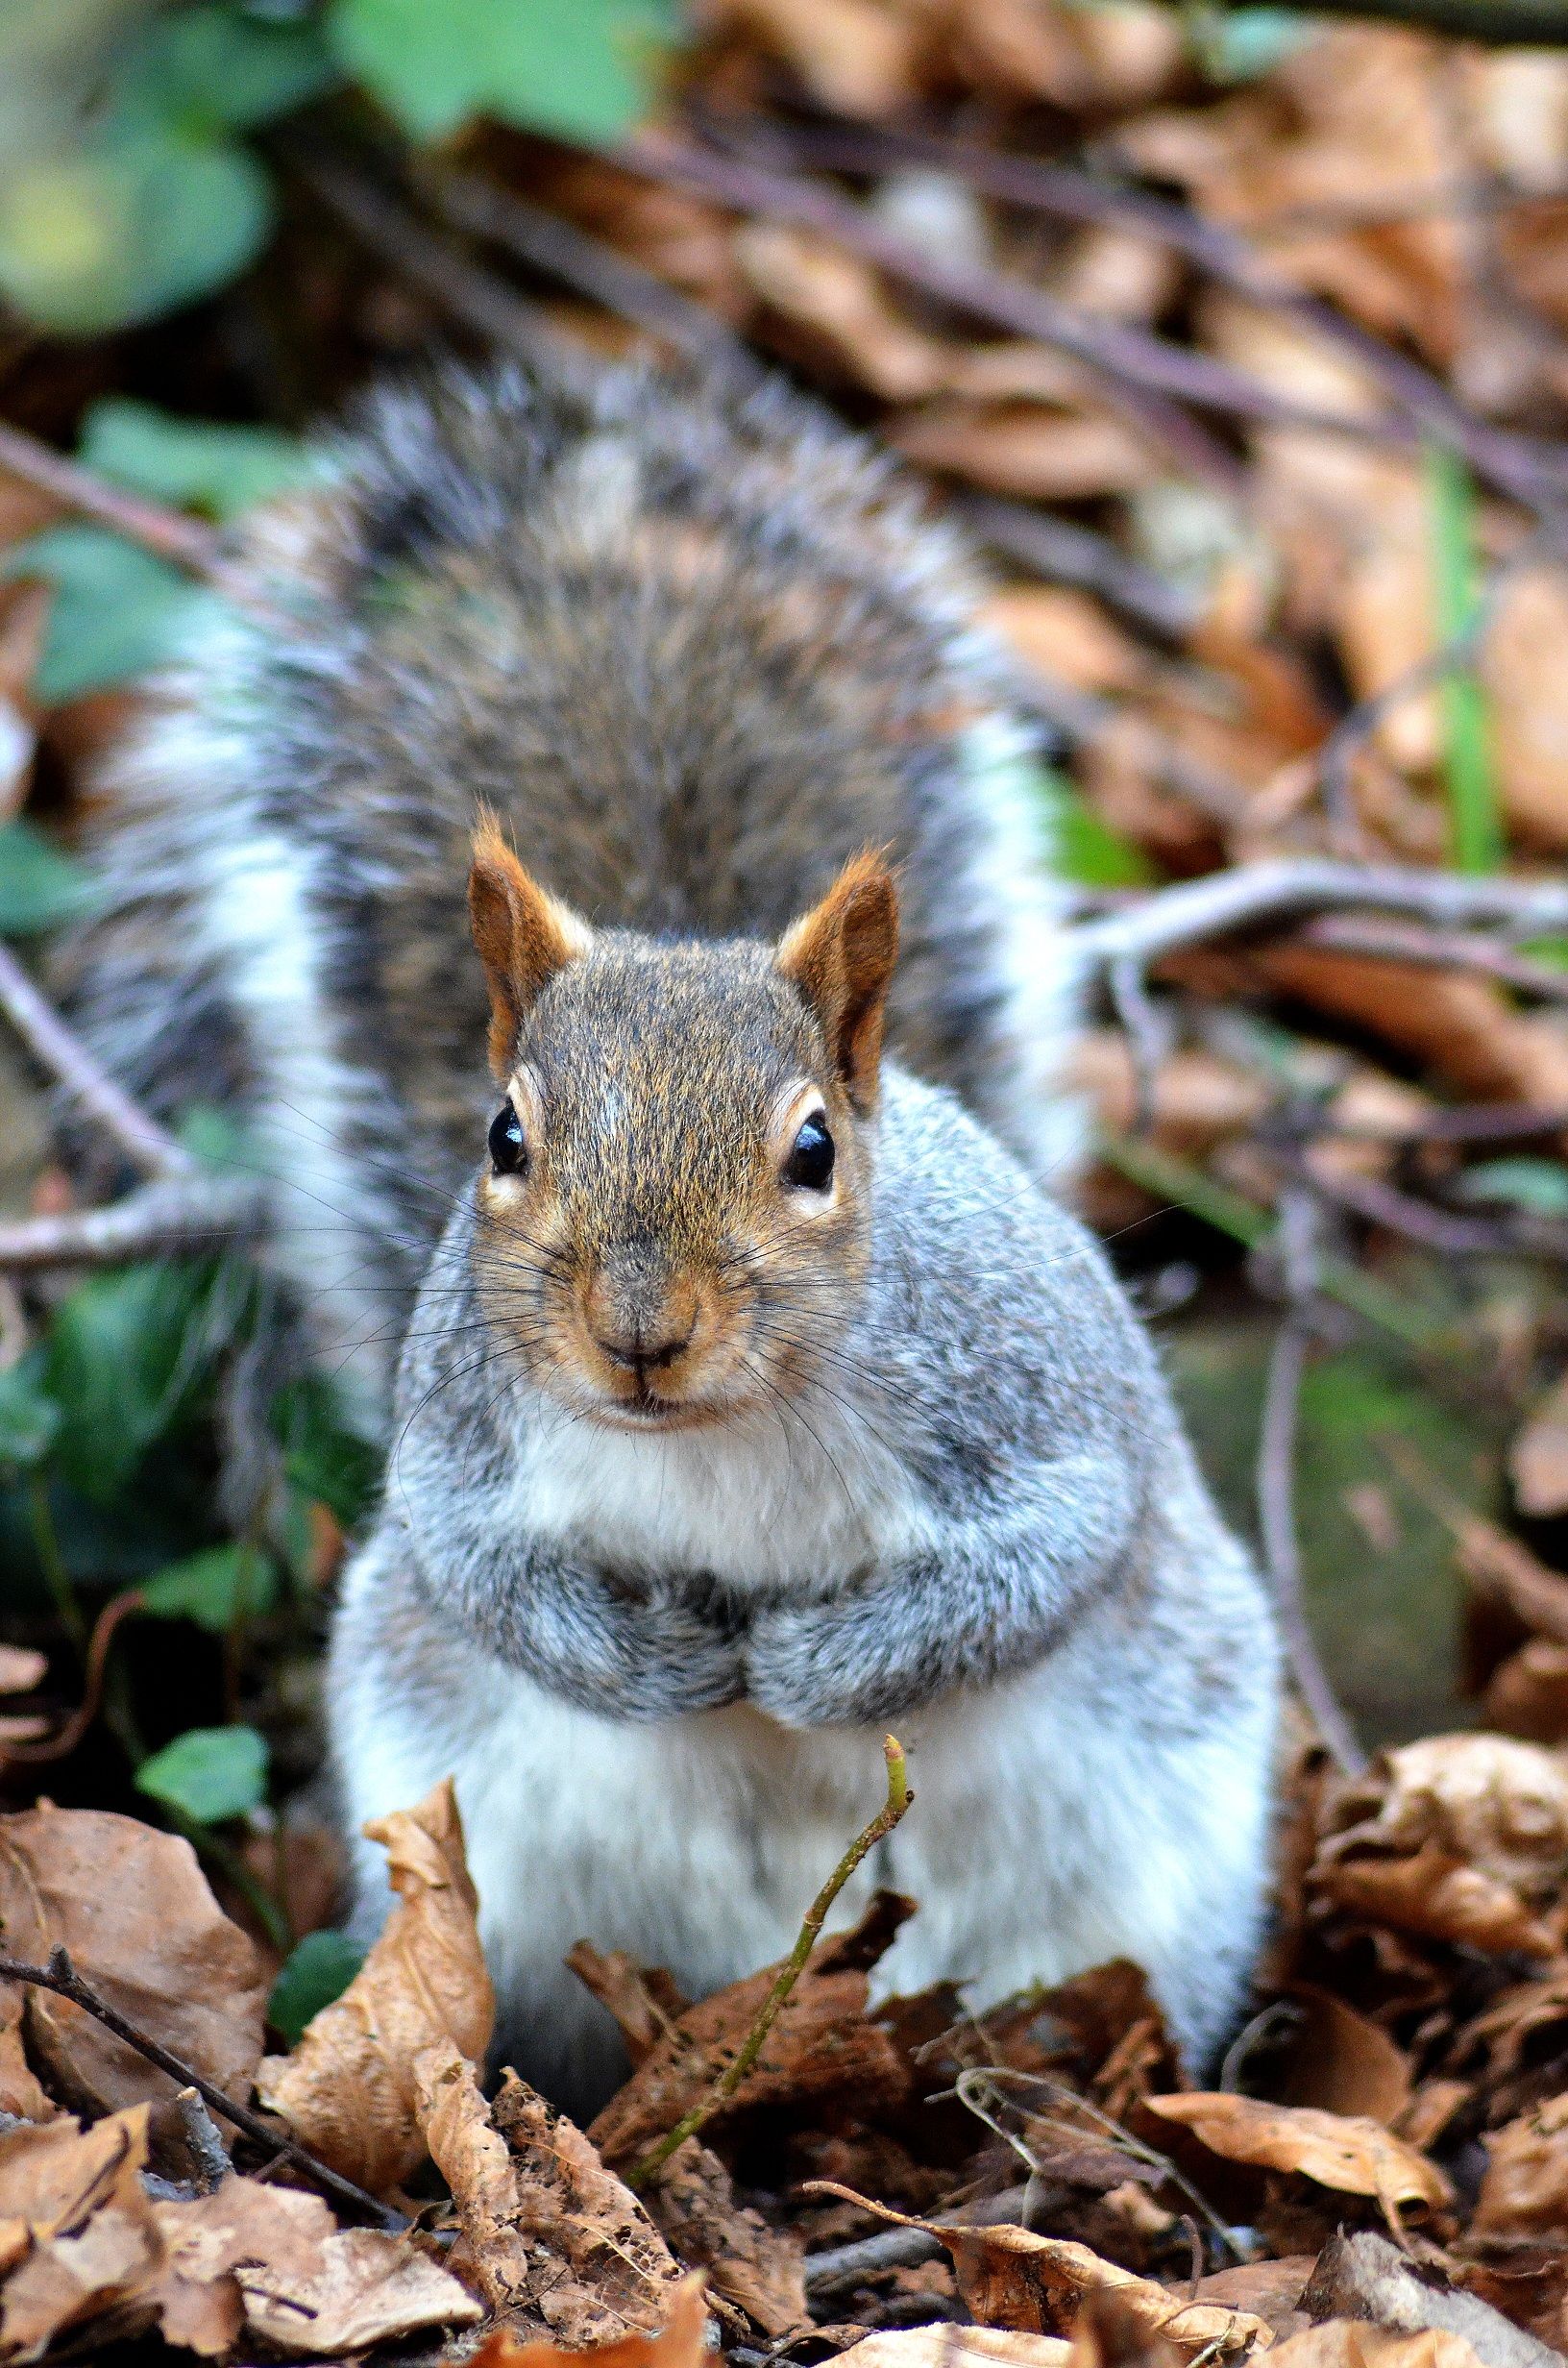 little chubby squirrel | Pictures | Pinterest | Squirrel and Animal